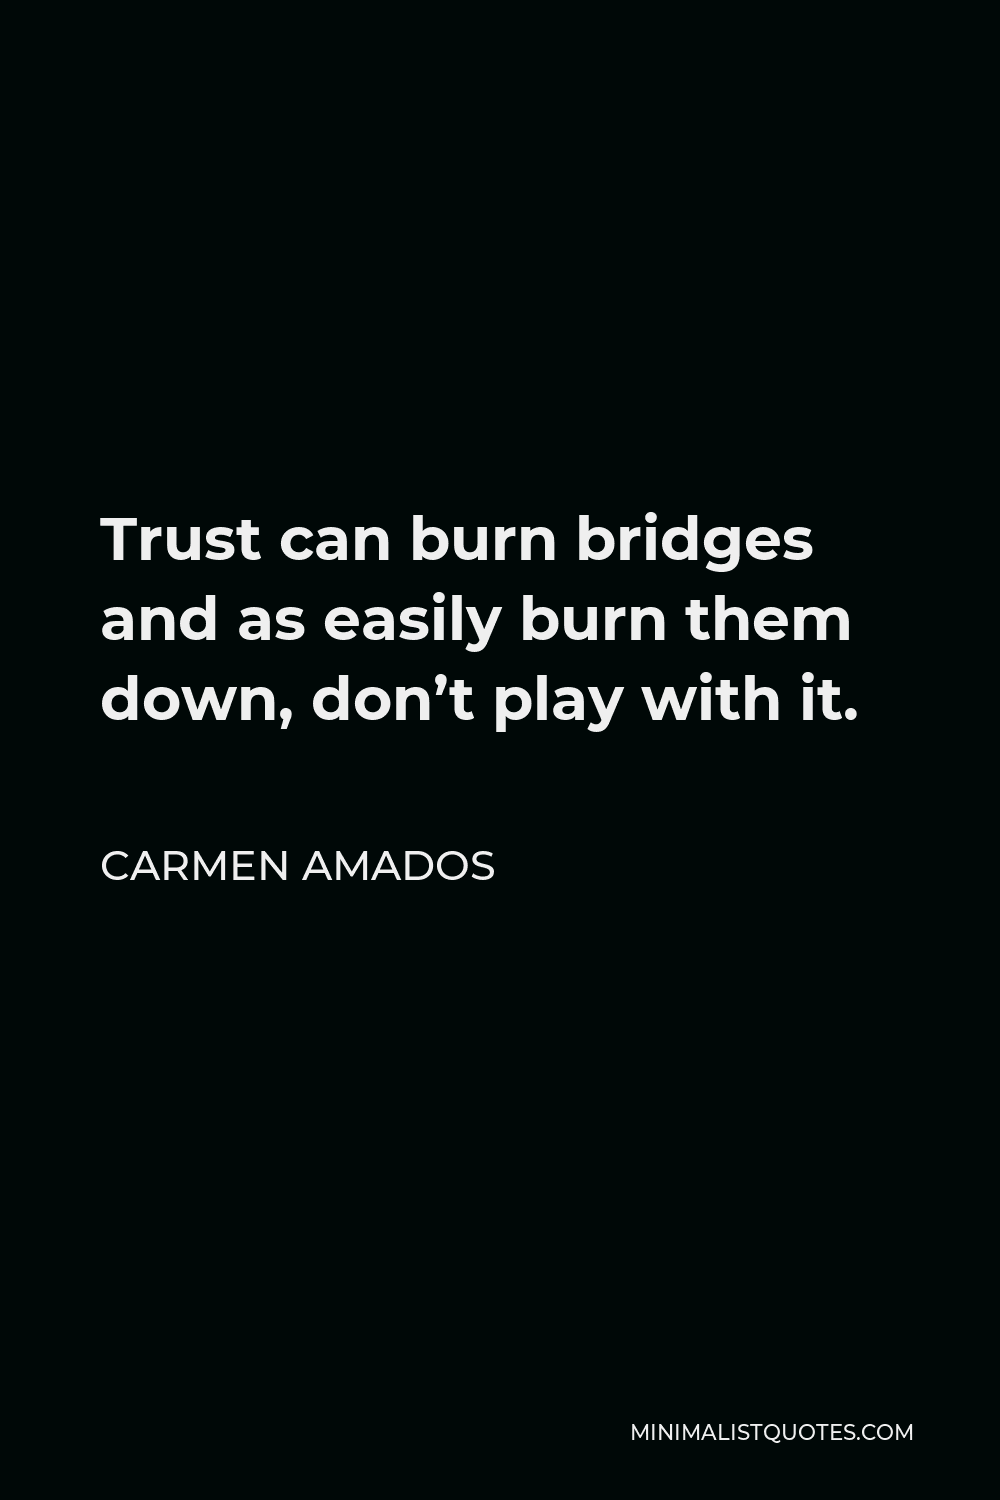 Carmen Amados Quote - Trust can burn bridges and as easily burn them down, don’t play with it.